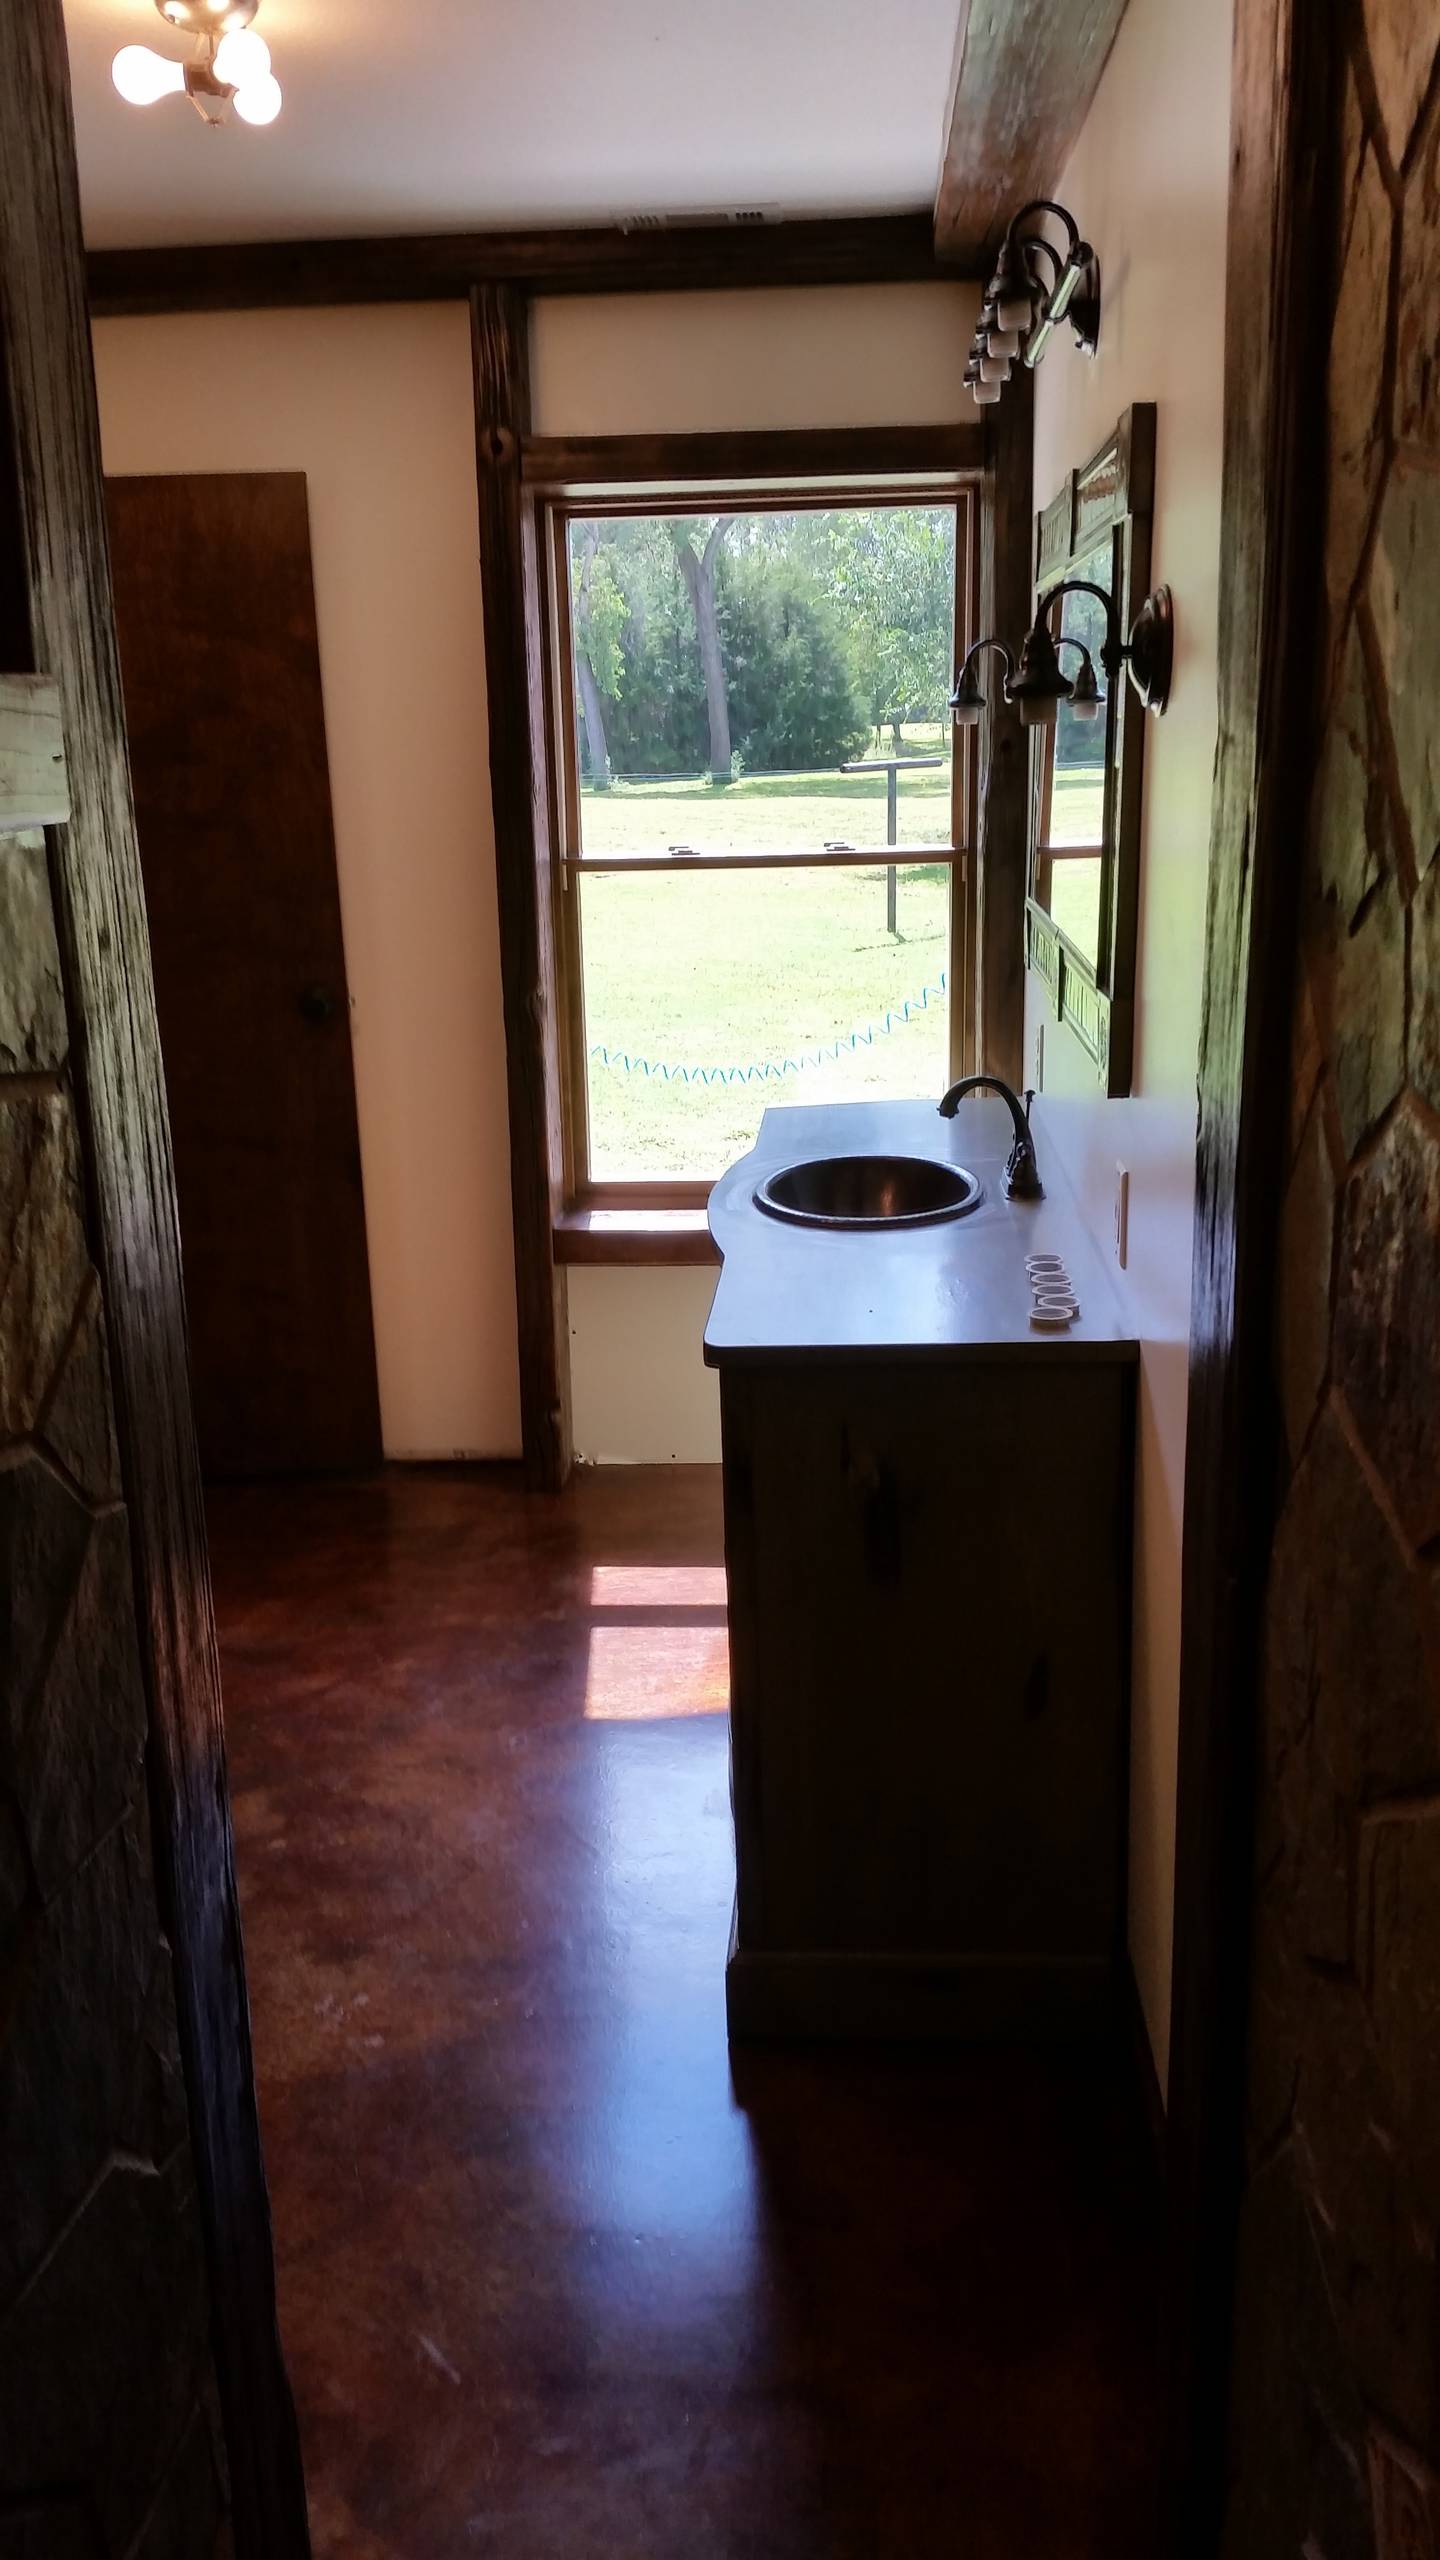 Rustic Bathroom from Start to Finish